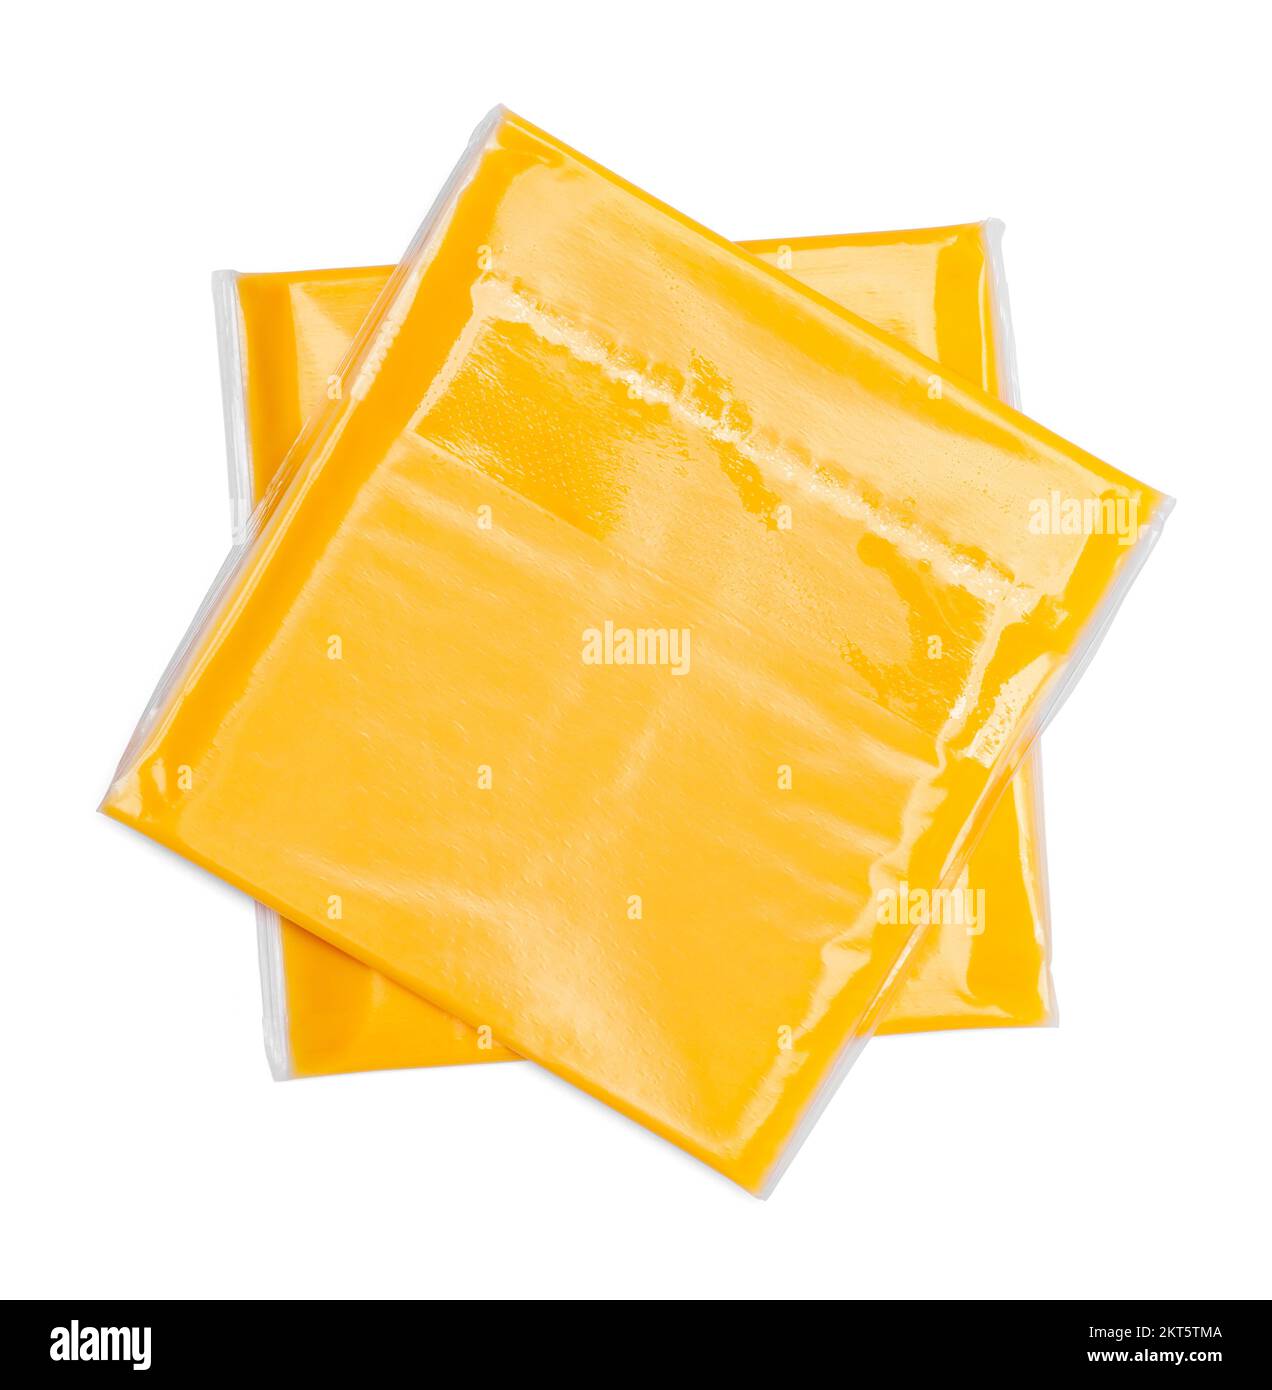 Two Wrapped Slices of Cheese Cut Out on White. Stock Photo